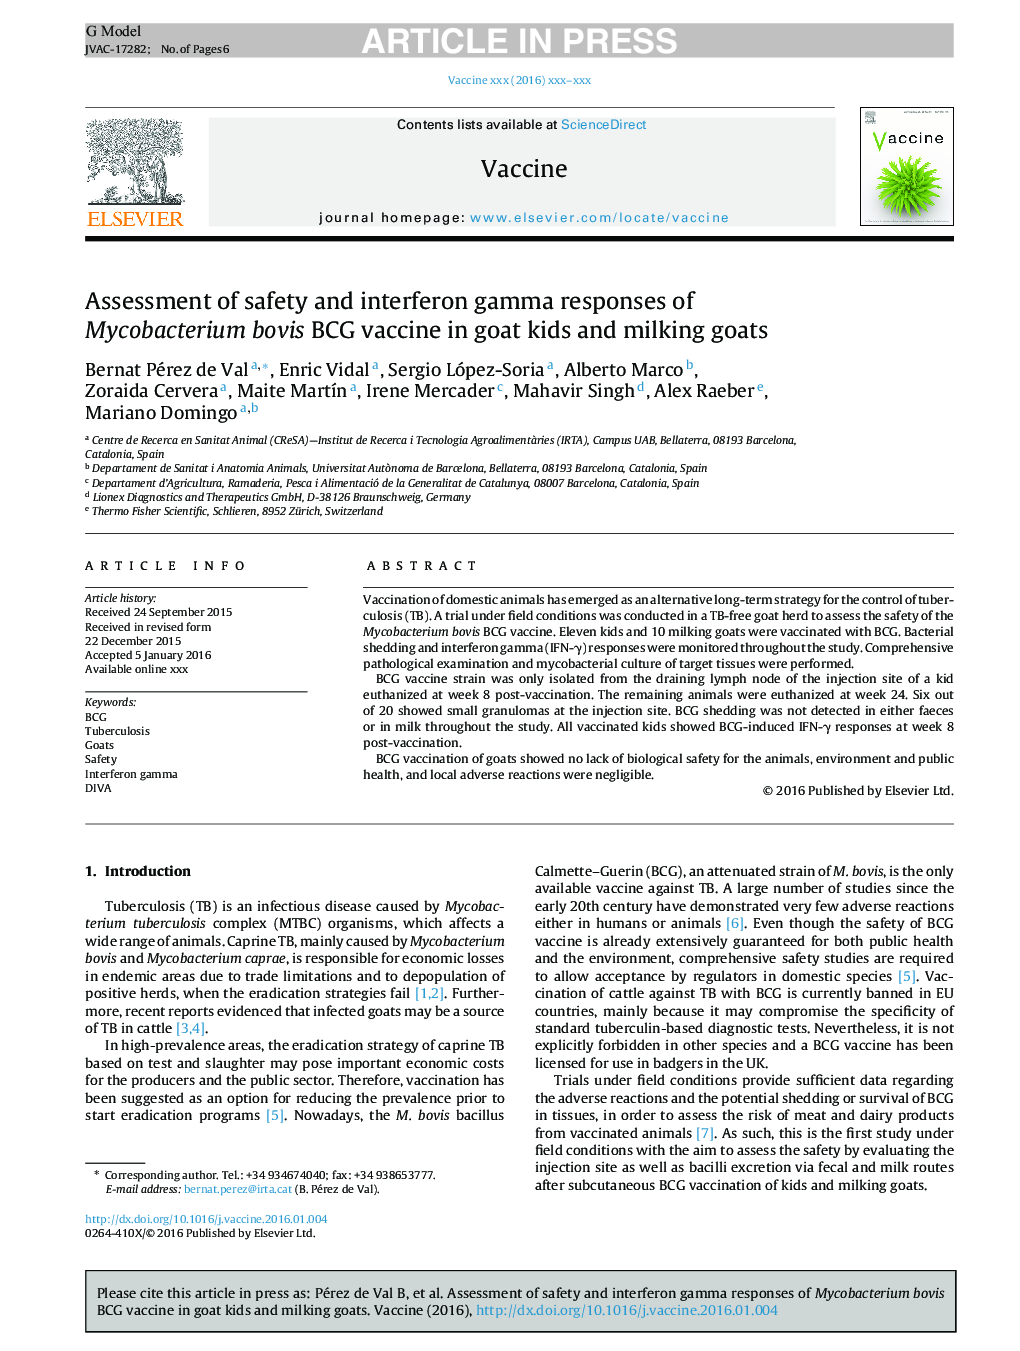 Assessment of safety and interferon gamma responses of Mycobacterium bovis BCG vaccine in goat kids and milking goats